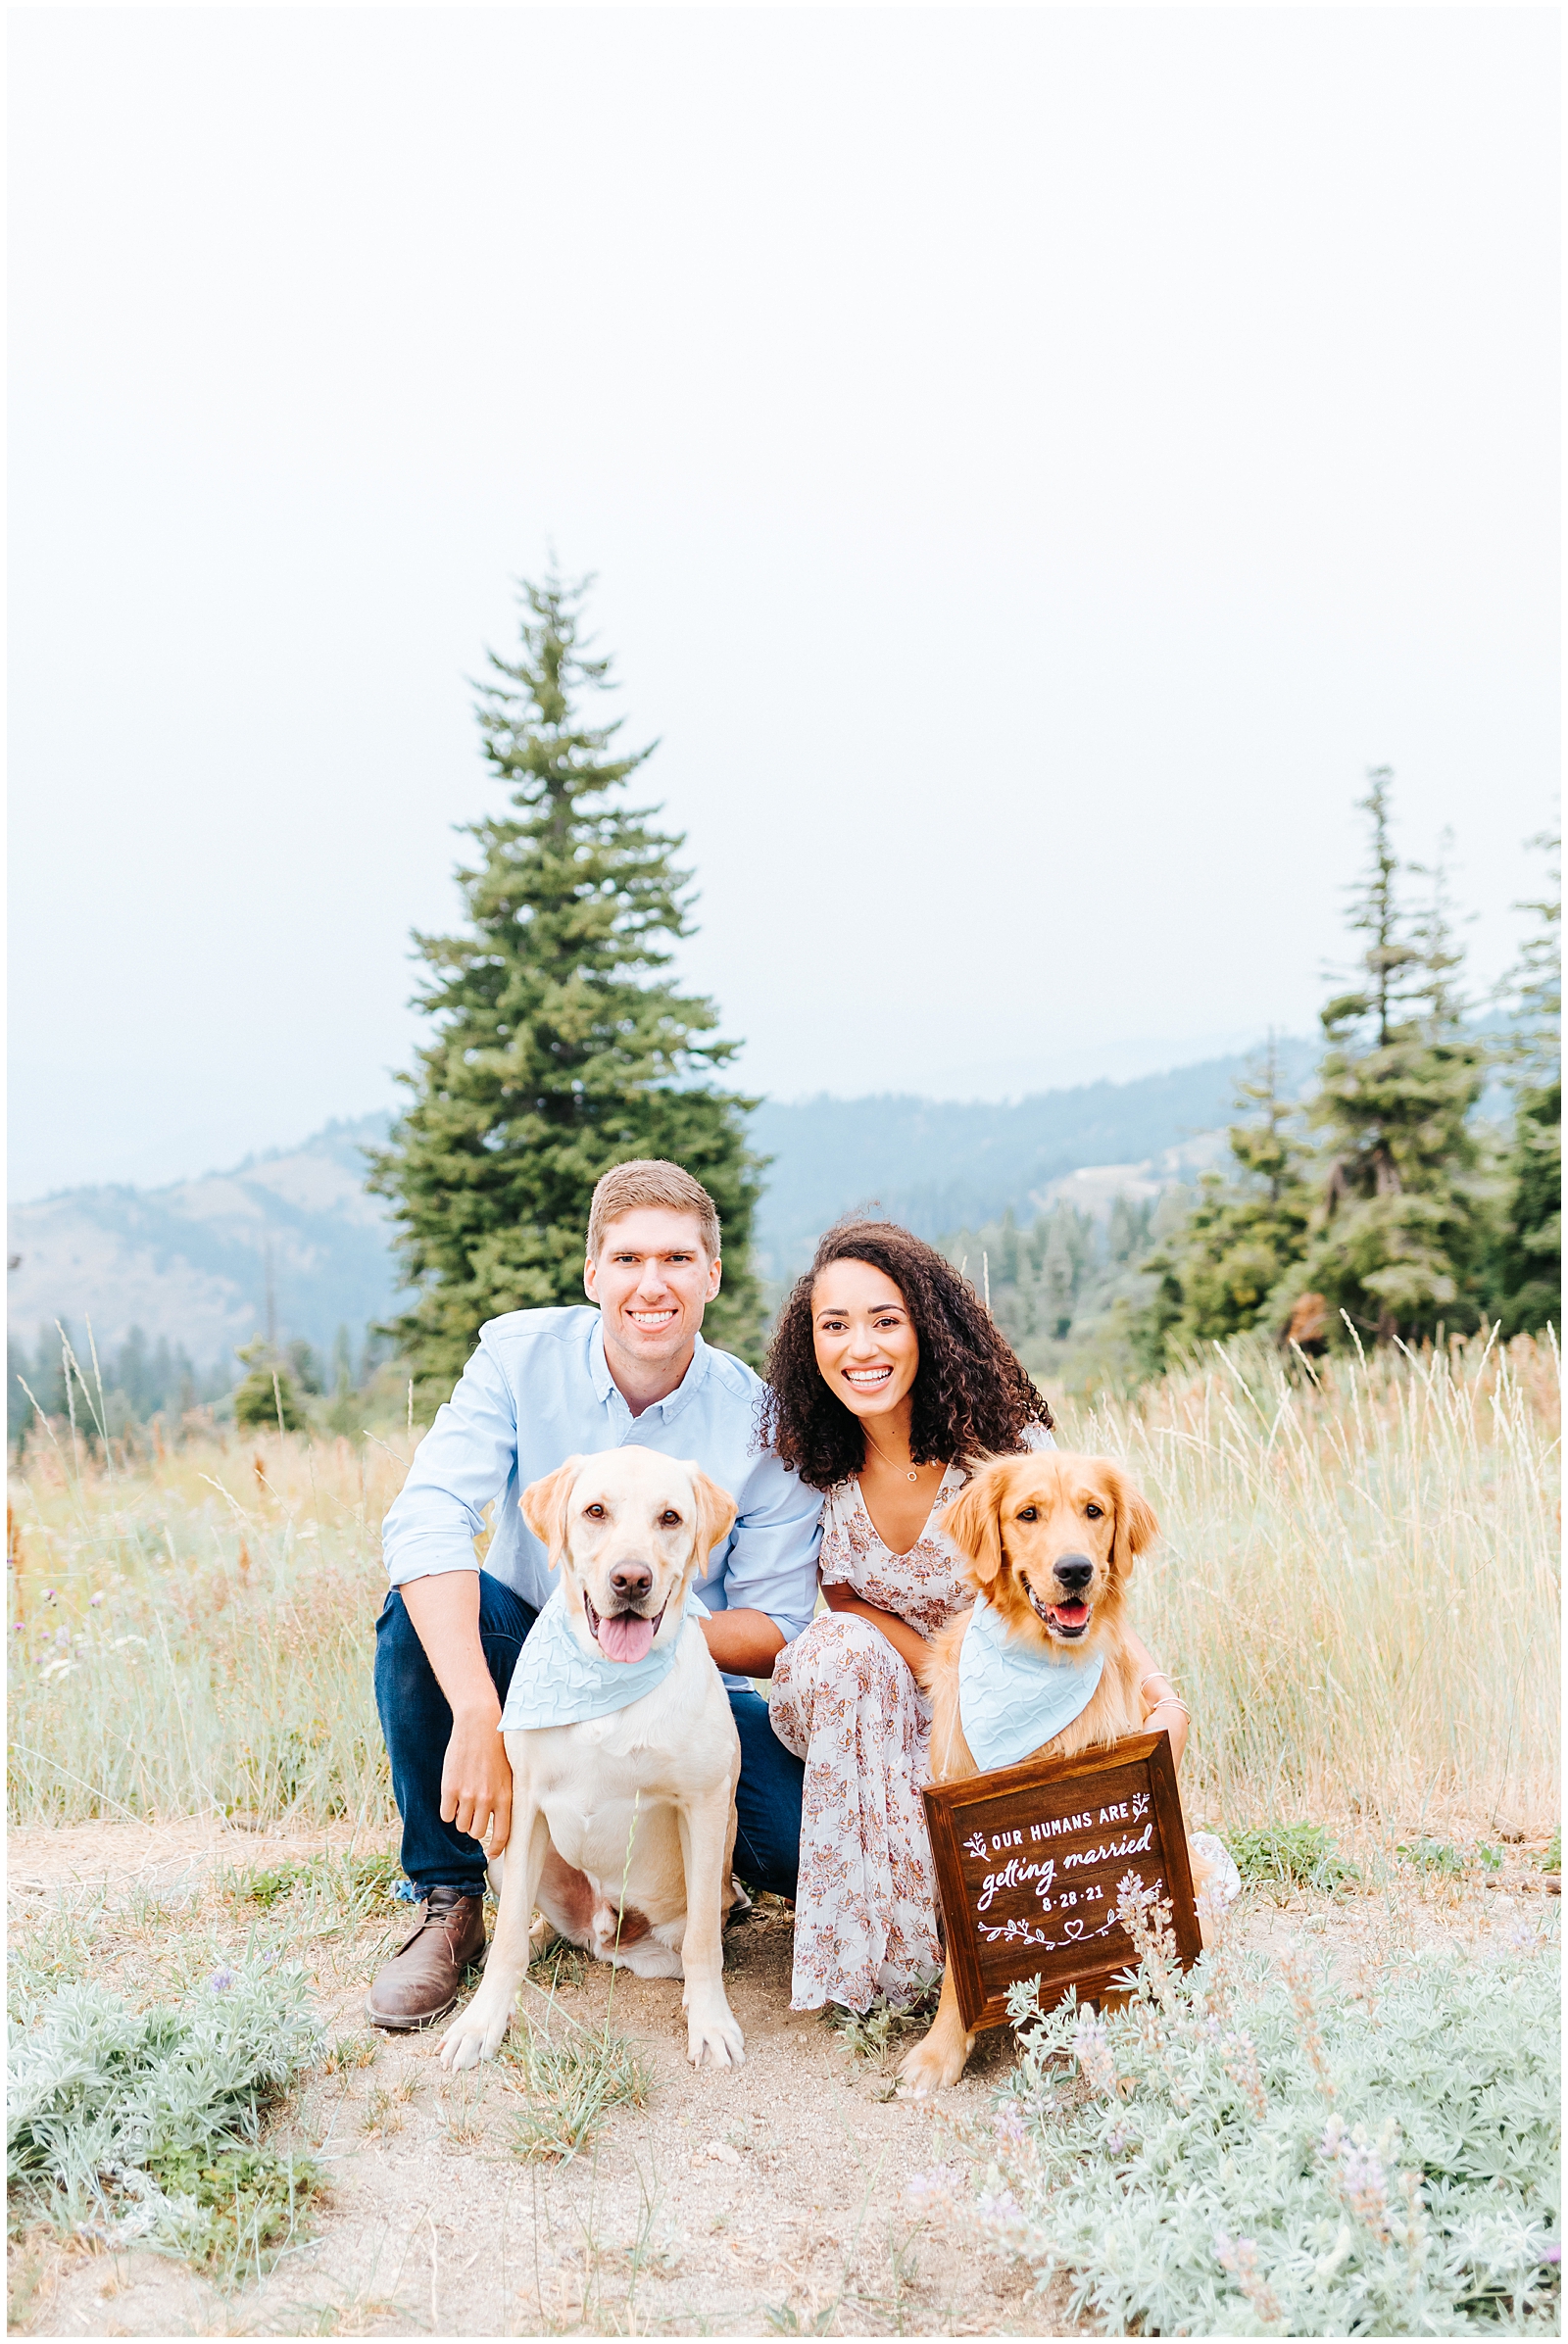 Bogus Basin Summer Engagement with Dogs - Our Humans are Getting Married